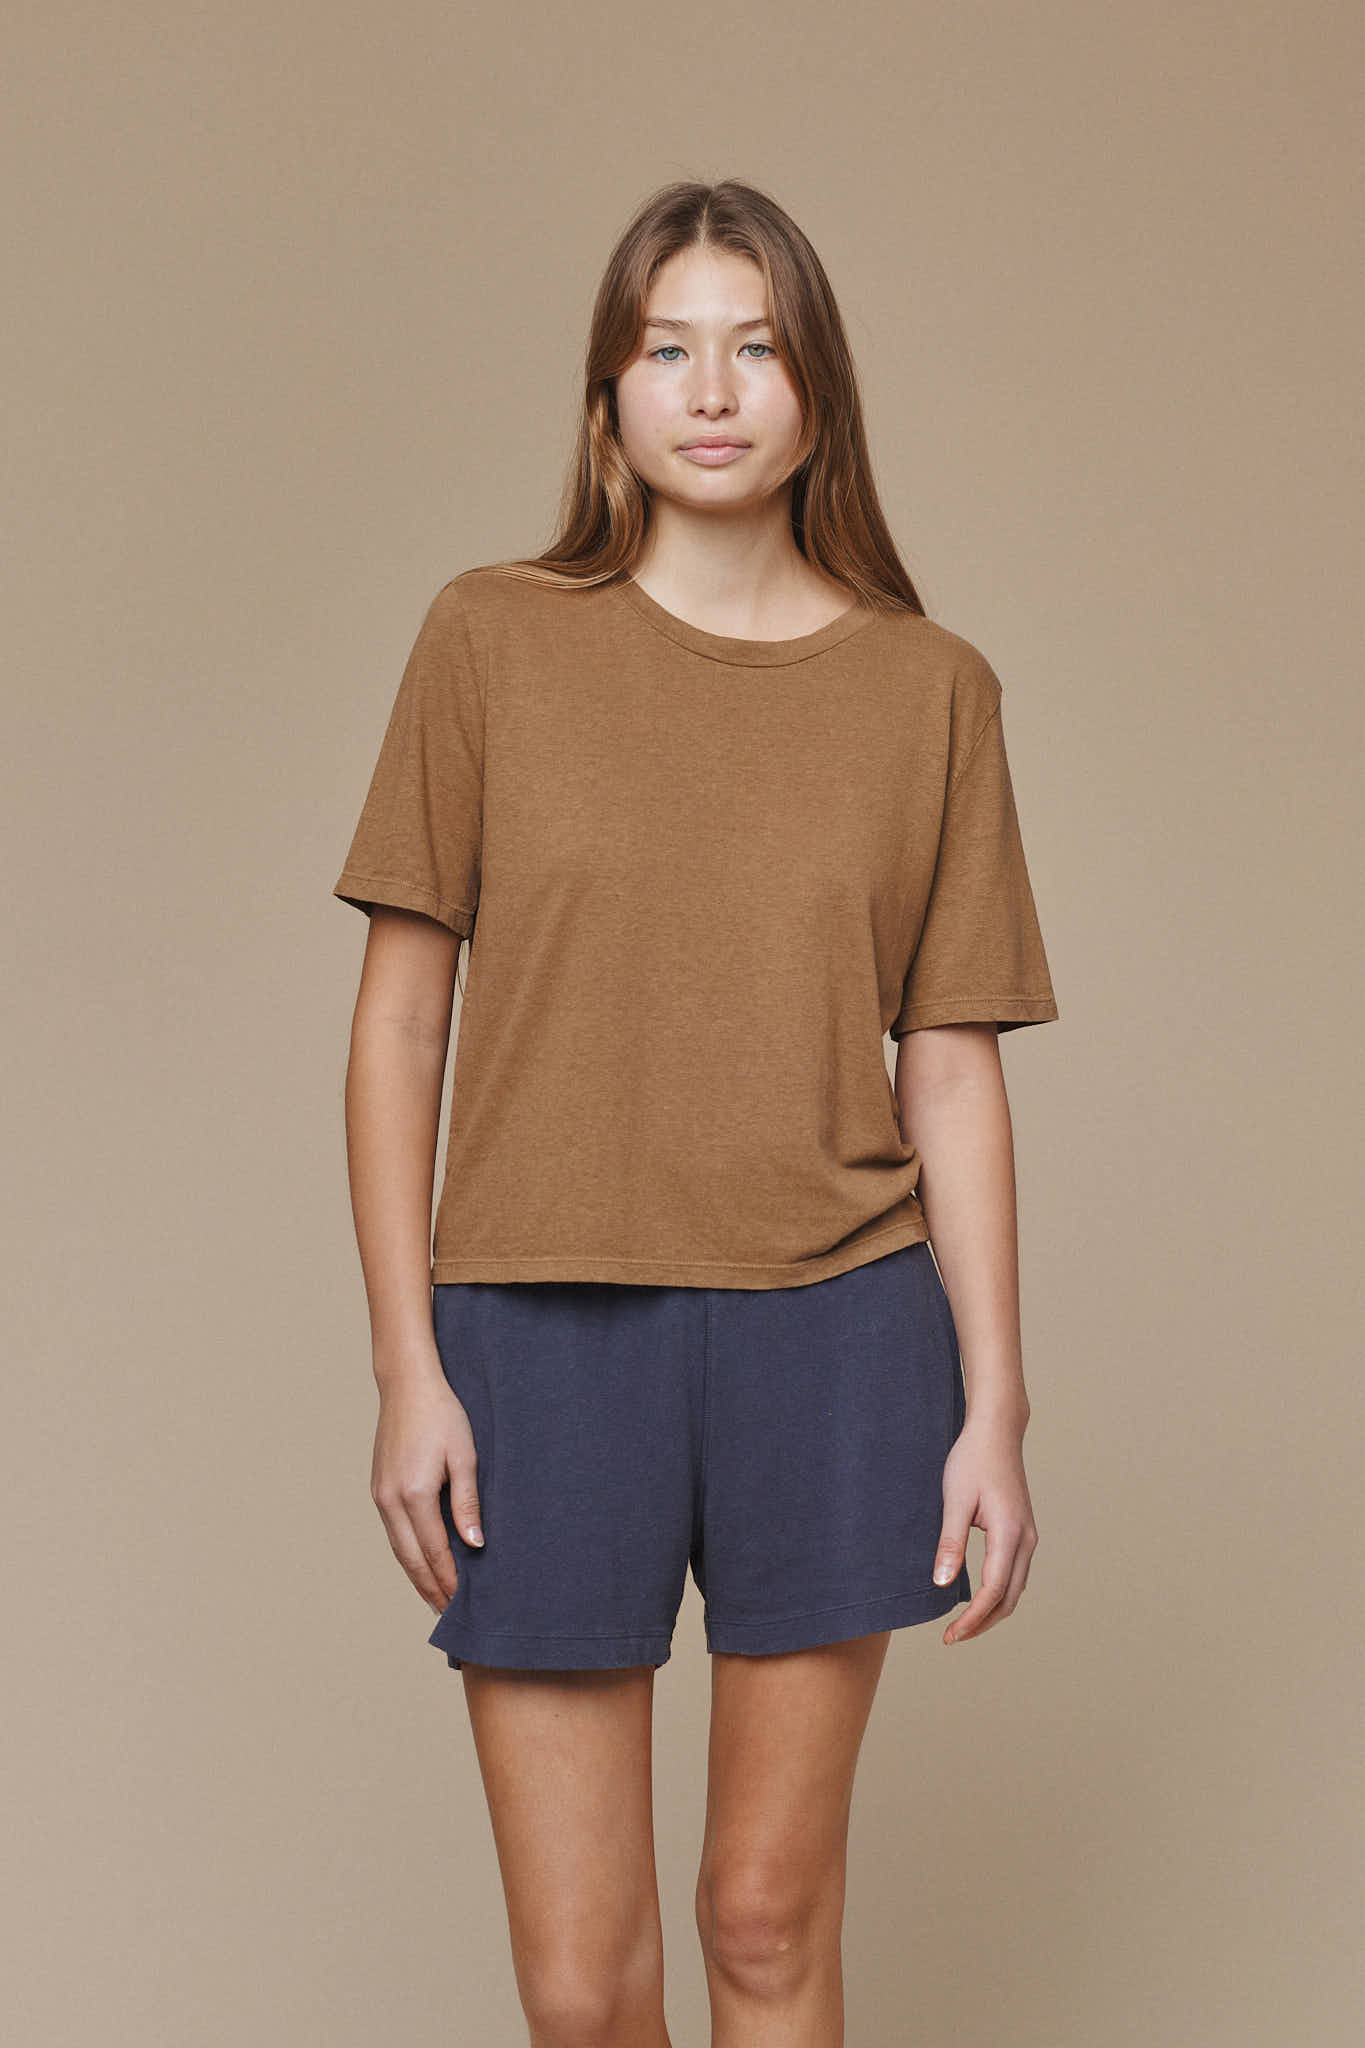 Silverlake Cropped Tee | Jungmaven Hemp Clothing & Accessories / Color: